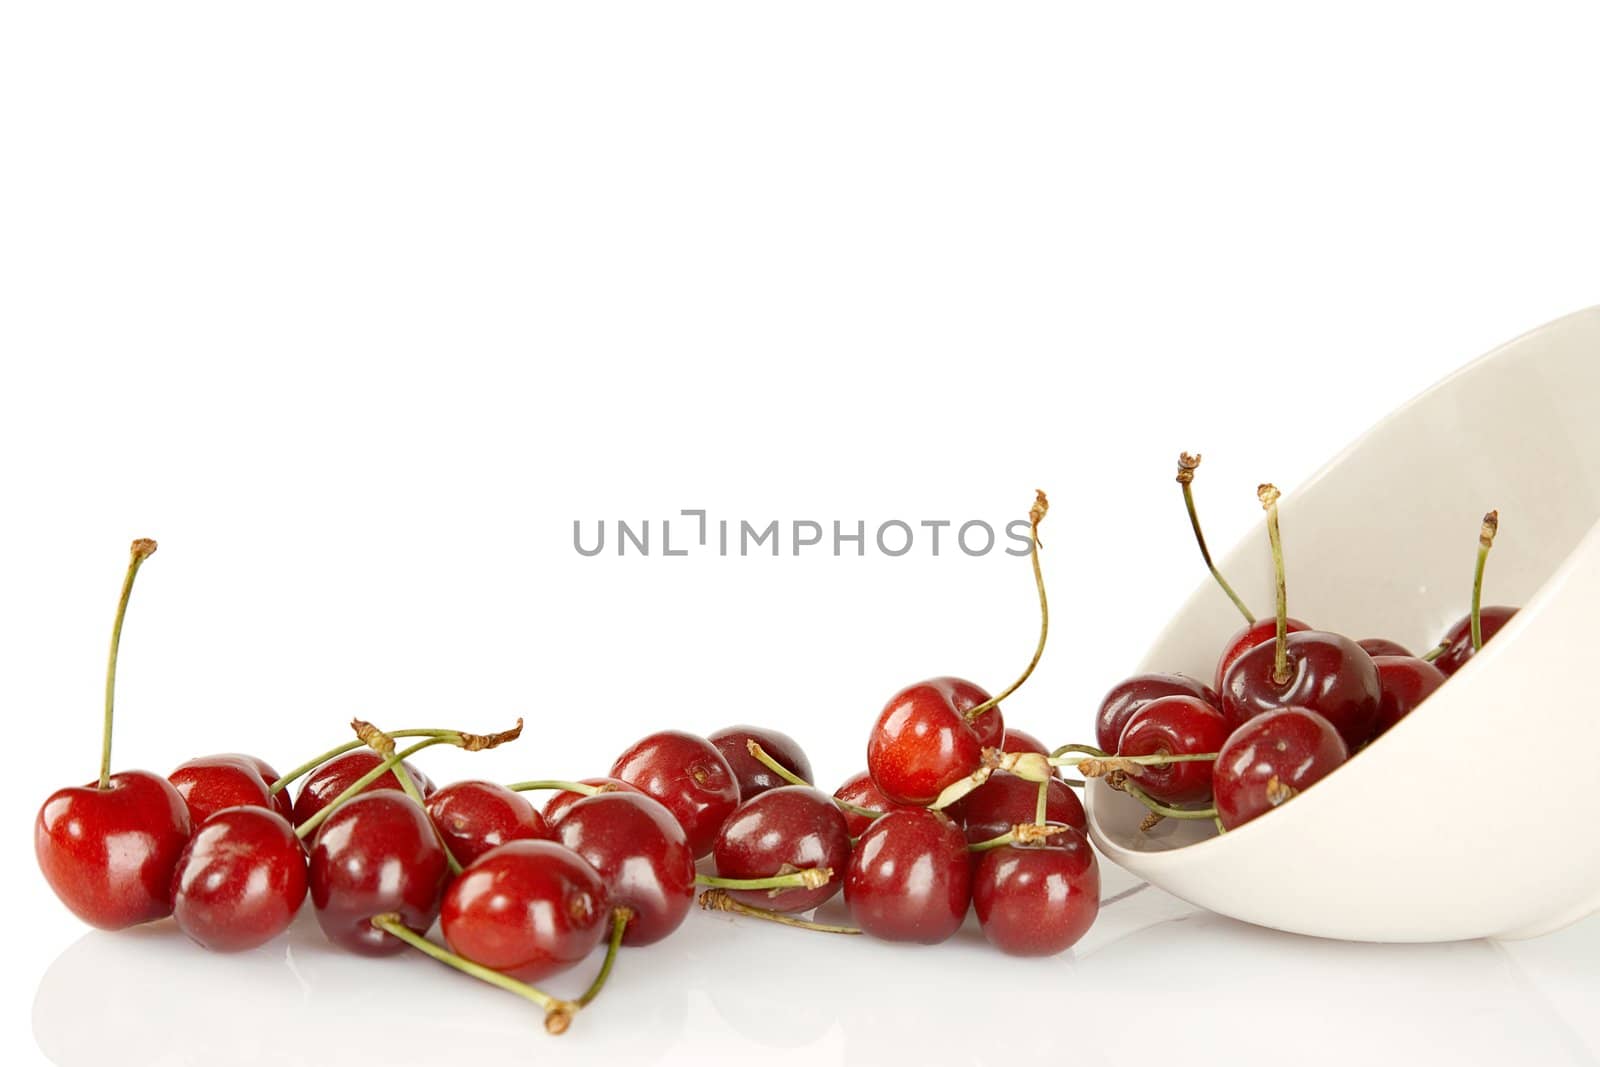 Sweet red cherries and ceramic bowl isolated on a white background